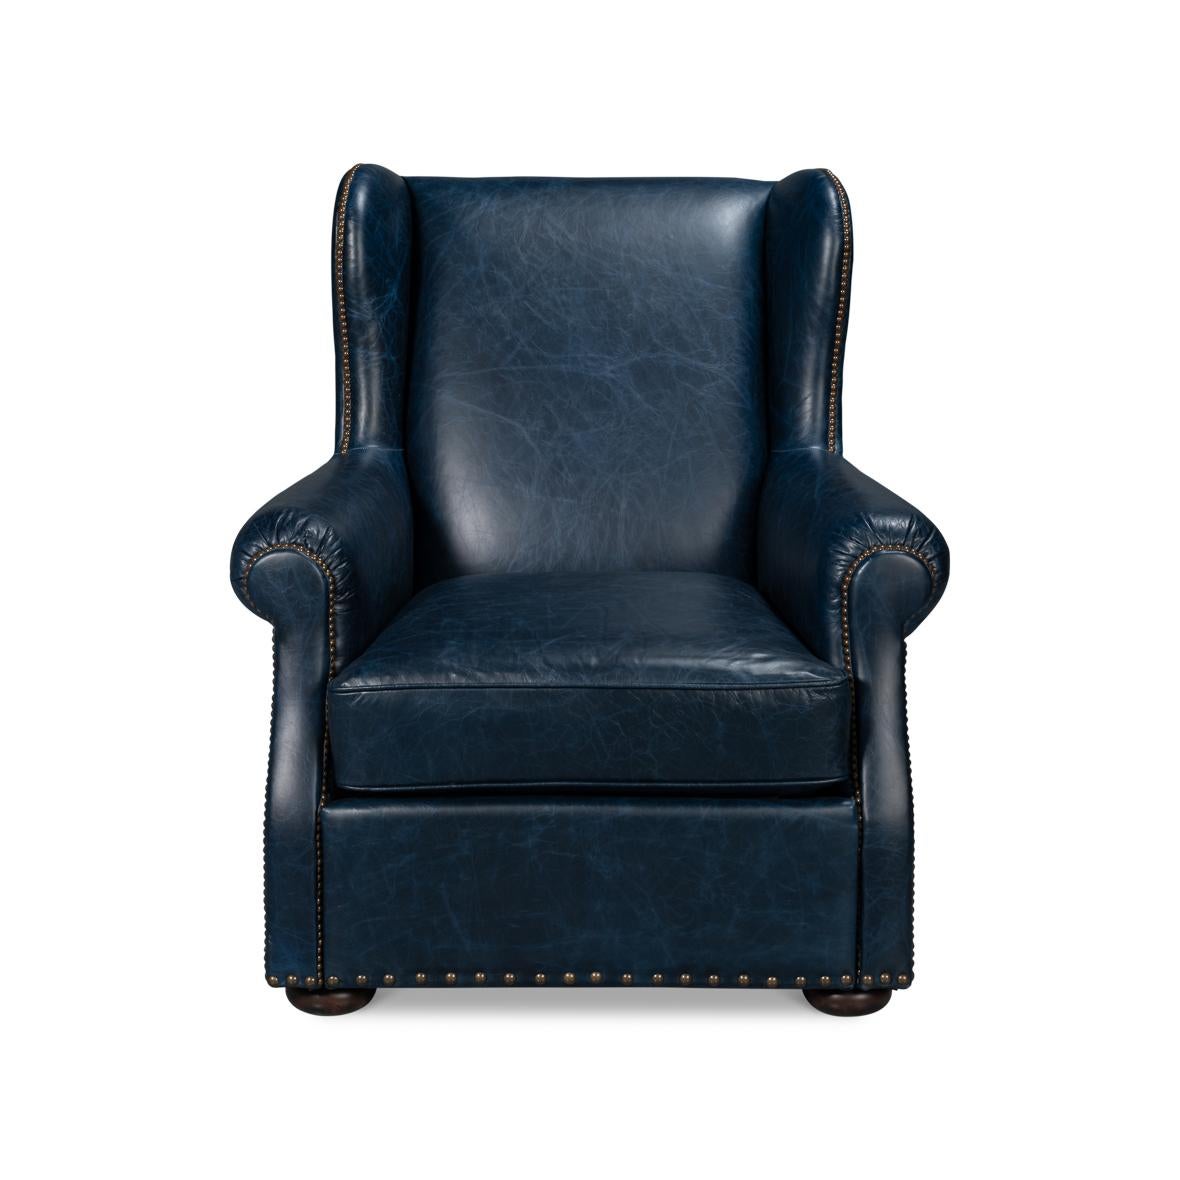 Featuring a high back design for ultimate support and rolled arms with intricate pleating detail, inviting you to a world of comfort with just one look. Wrapped in Chateau Blue leather, its rich color is the epitome of luxury, bound to add a touch